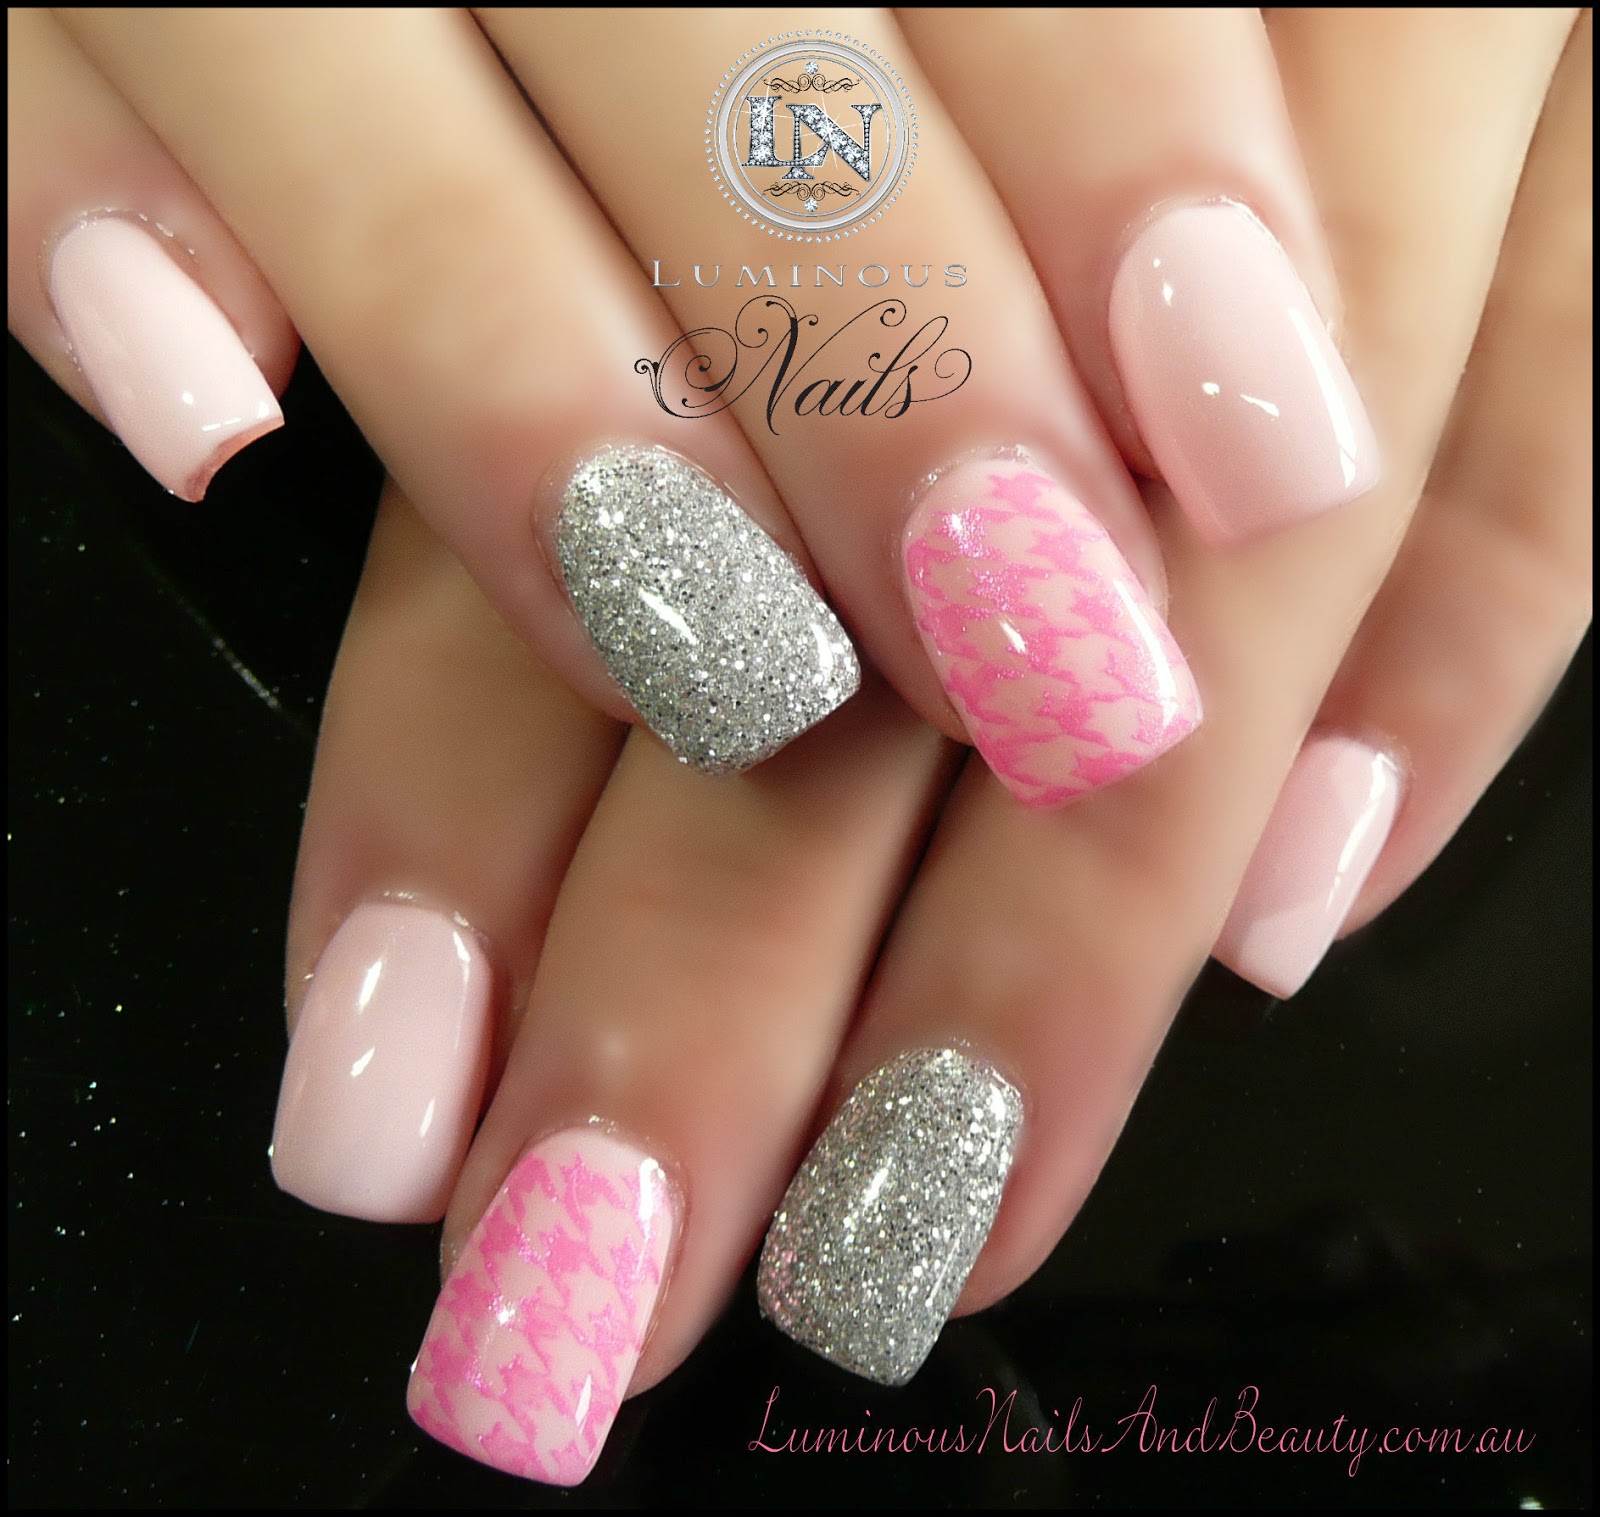 Lumious Nails and Beauty, Gold Coast Queensland. Acrylic Nails, Gel Nails, Sculptured Acrylic with Pink Smoothie Gel, Silver Glitter & Houndstooth Print.